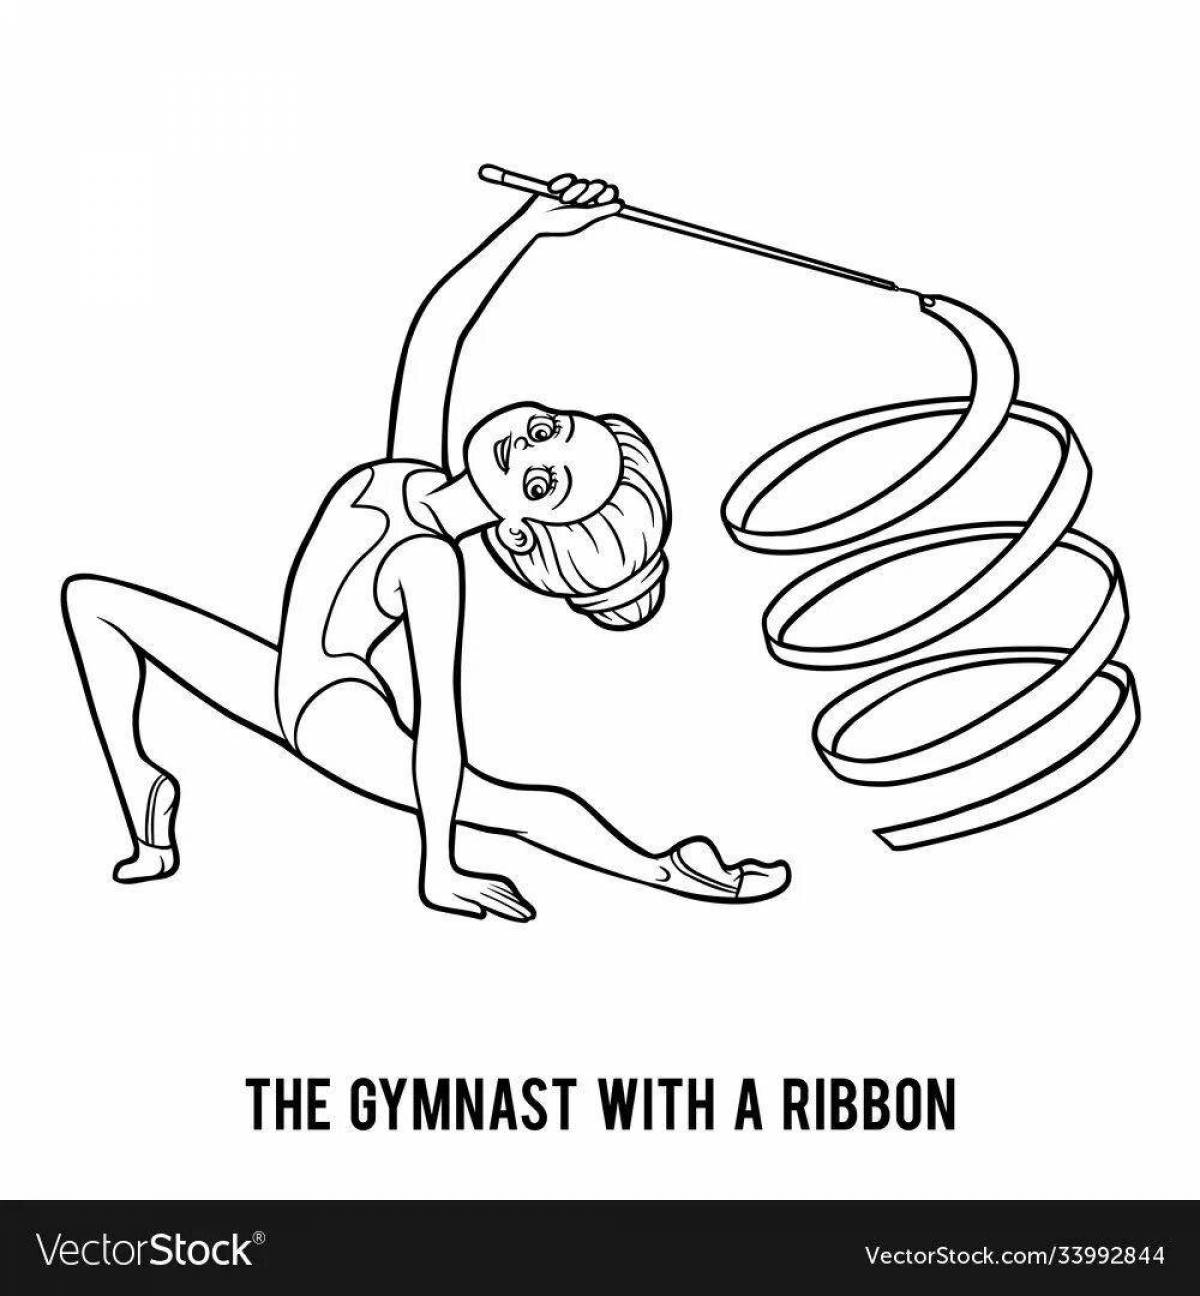 Coloring page energetic gymnastics for girls